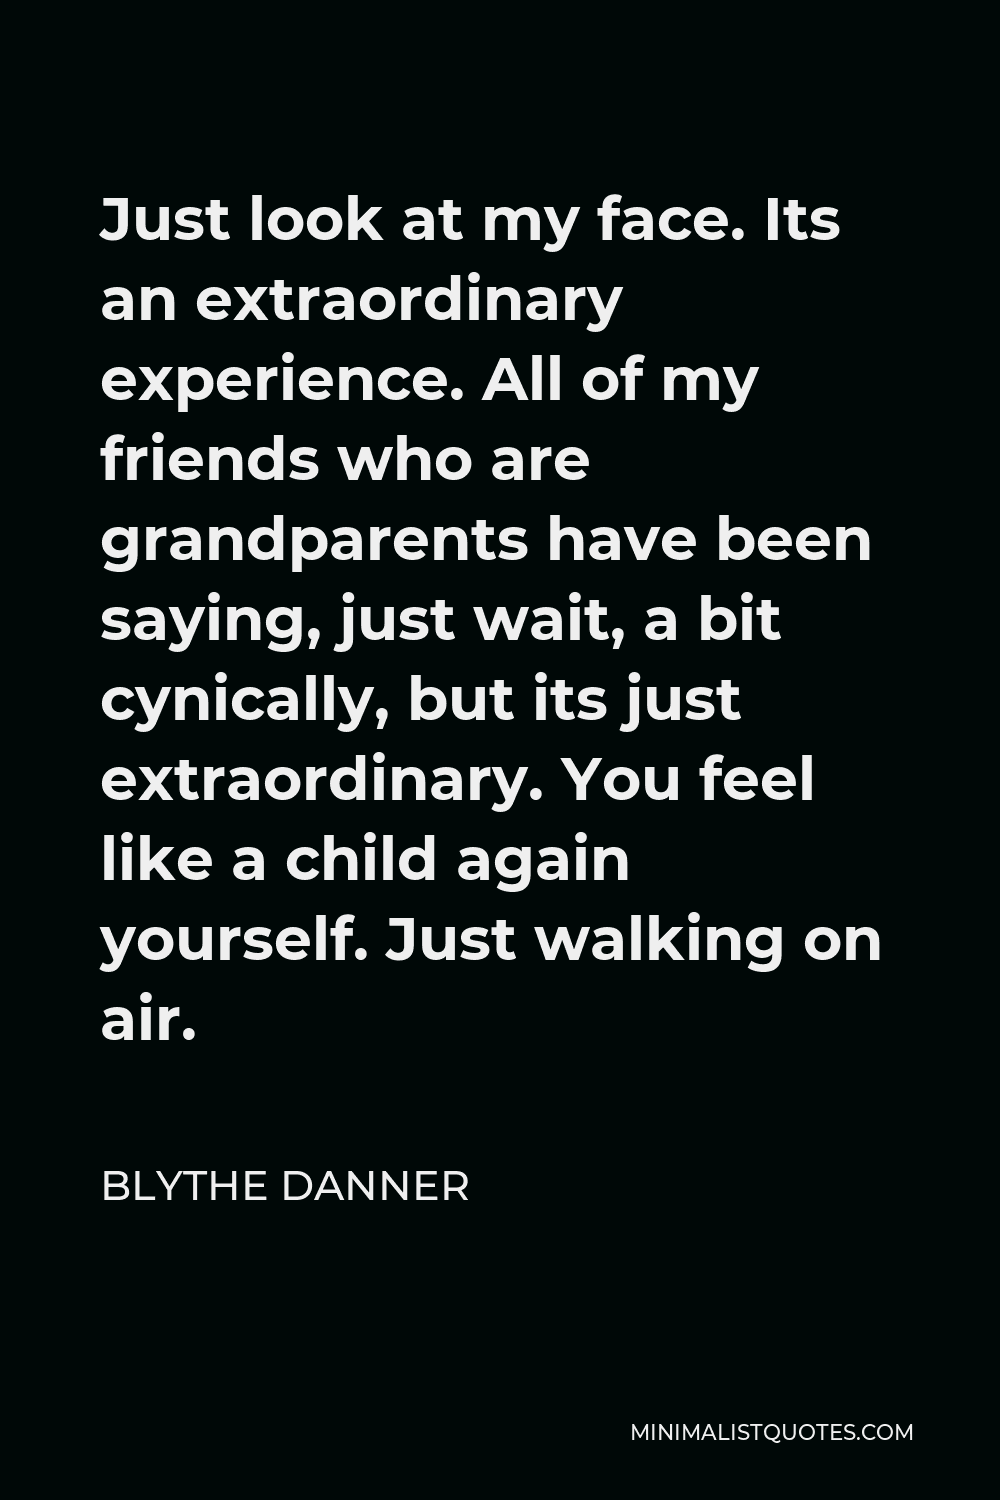 Blythe Danner Quote - Just look at my face. Its an extraordinary experience. All of my friends who are grandparents have been saying, just wait, a bit cynically, but its just extraordinary. You feel like a child again yourself. Just walking on air.